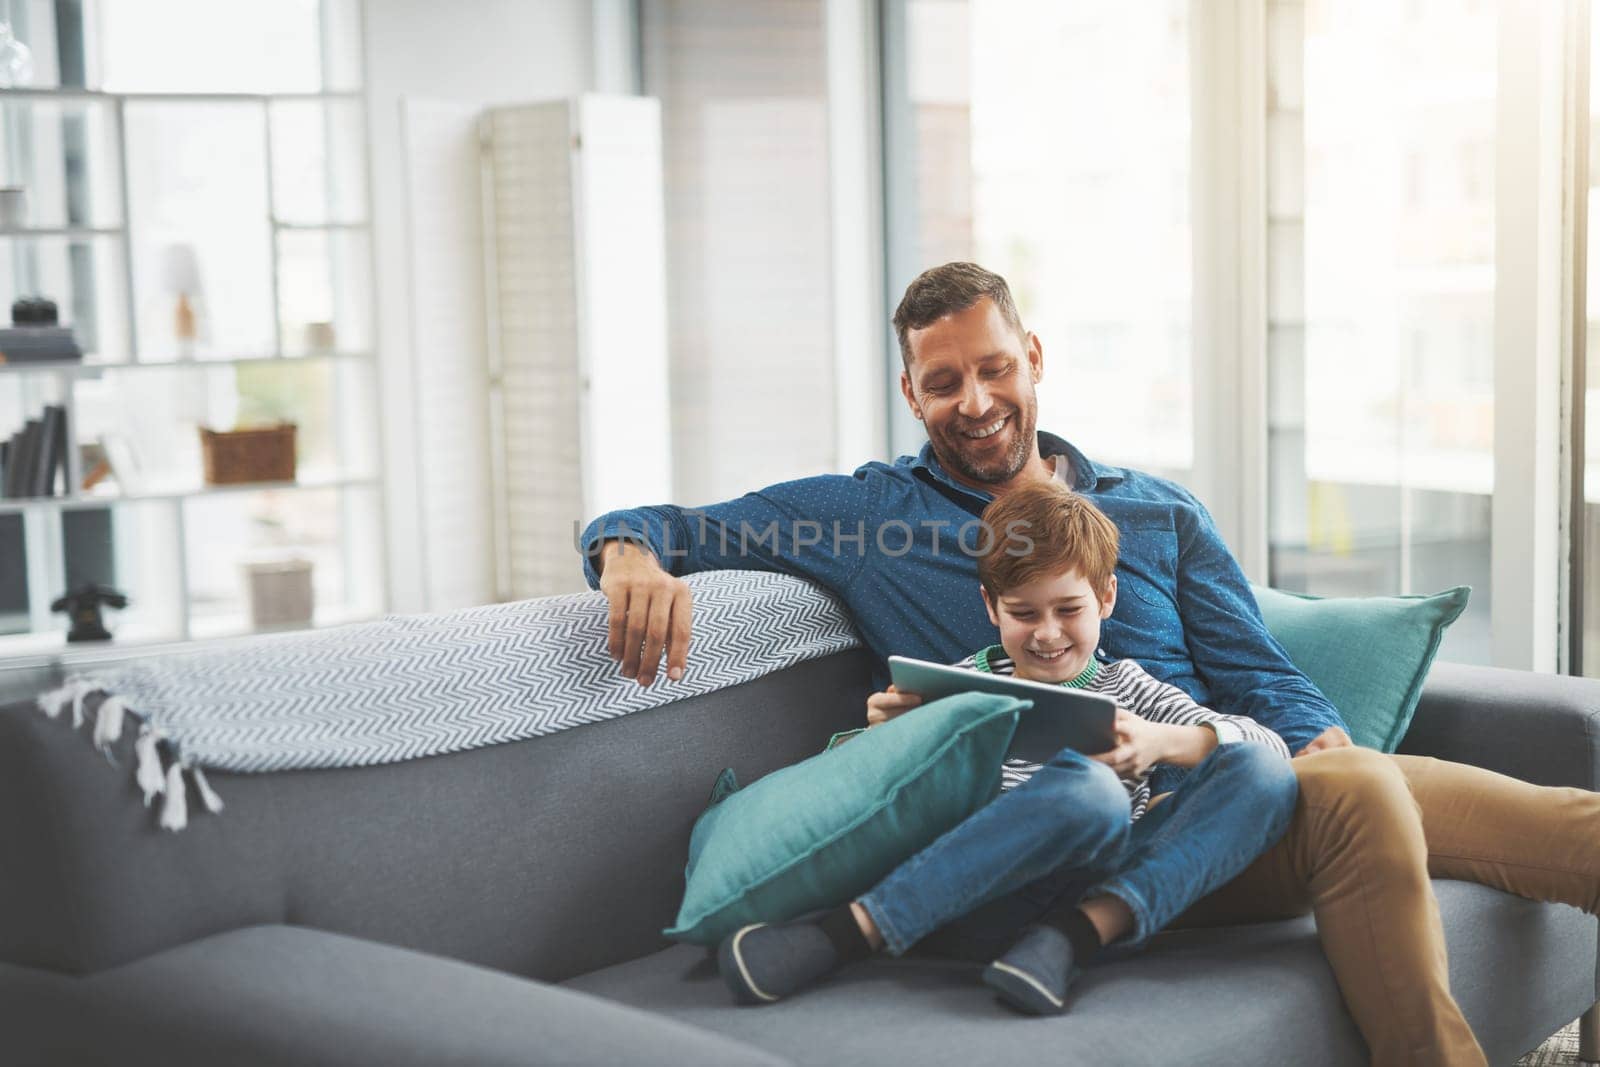 Learning in a fun way. a cheerful little boy browsing on a digital tablet while lying on his fathers lap at home during the day